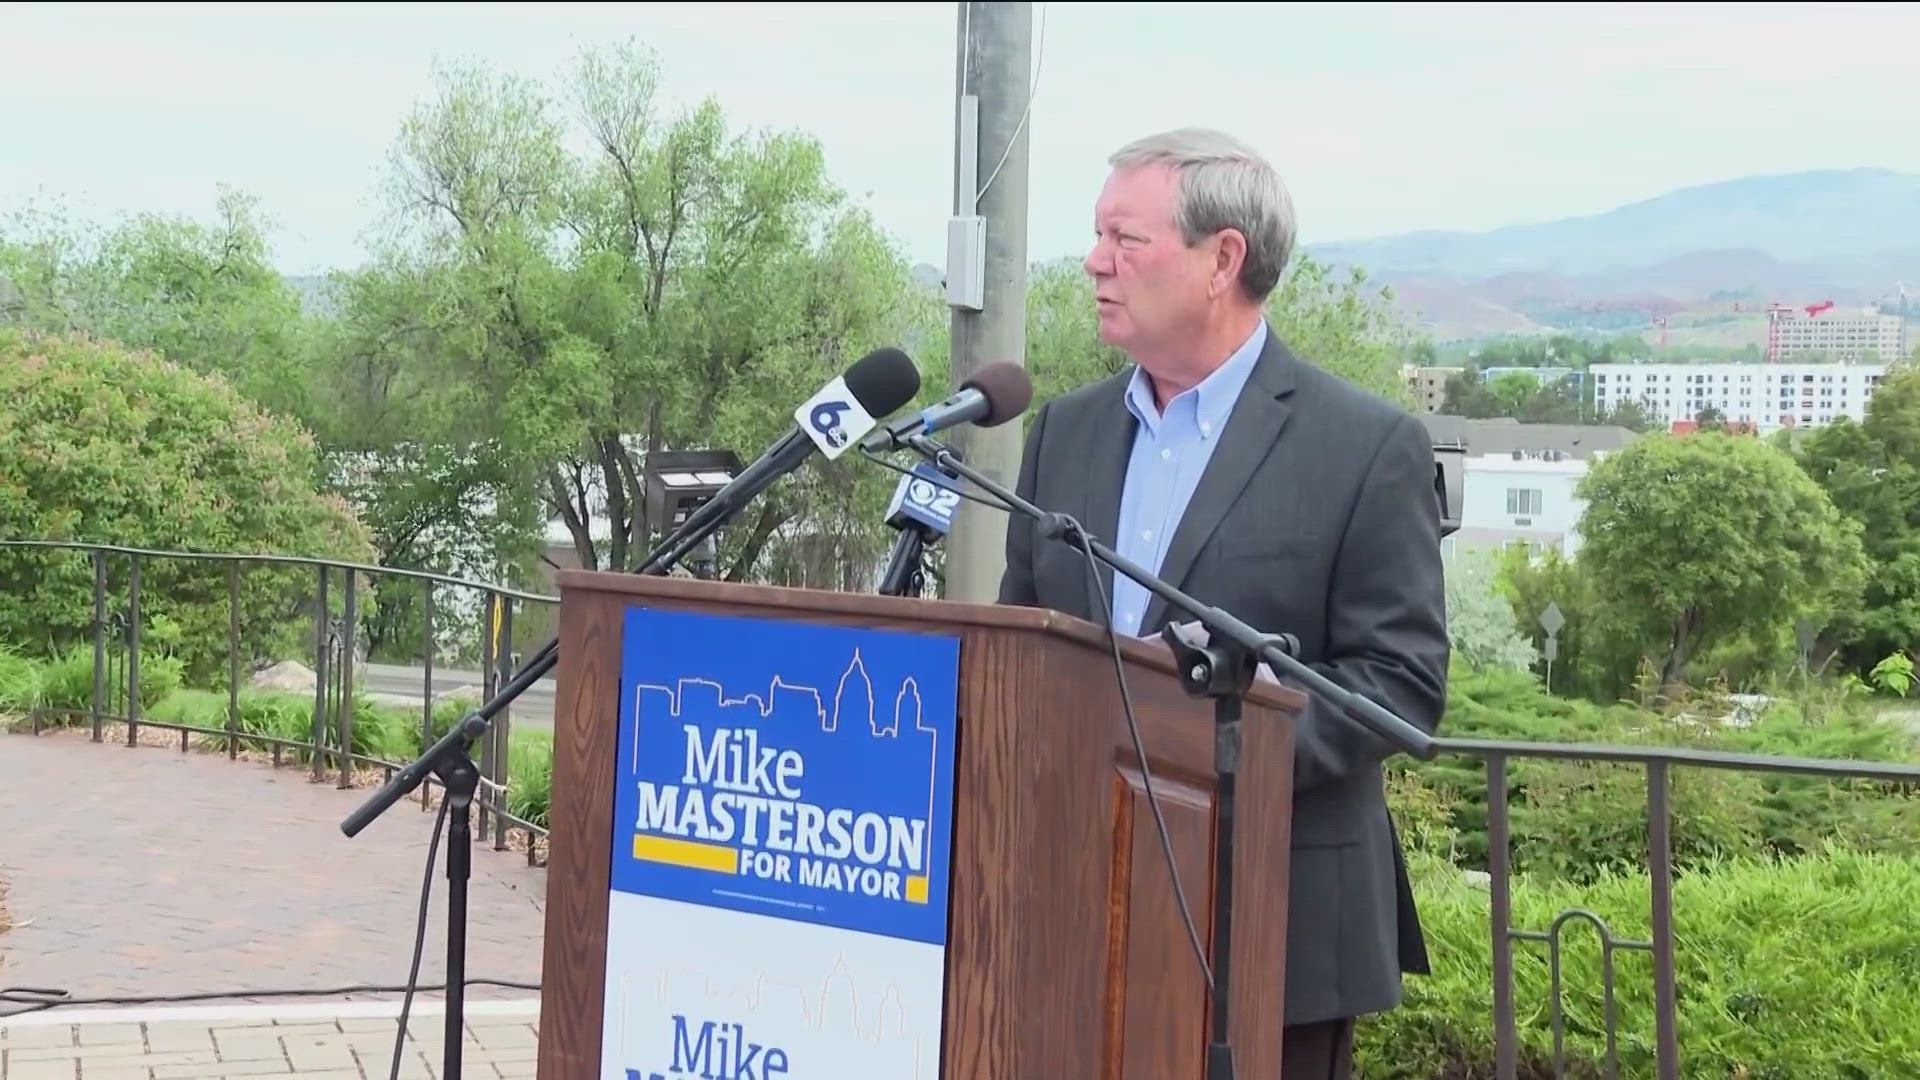 Mike Masterson served as BPD Chief from 2005 to 2015, he now has sights set on Boise's highest elected office.